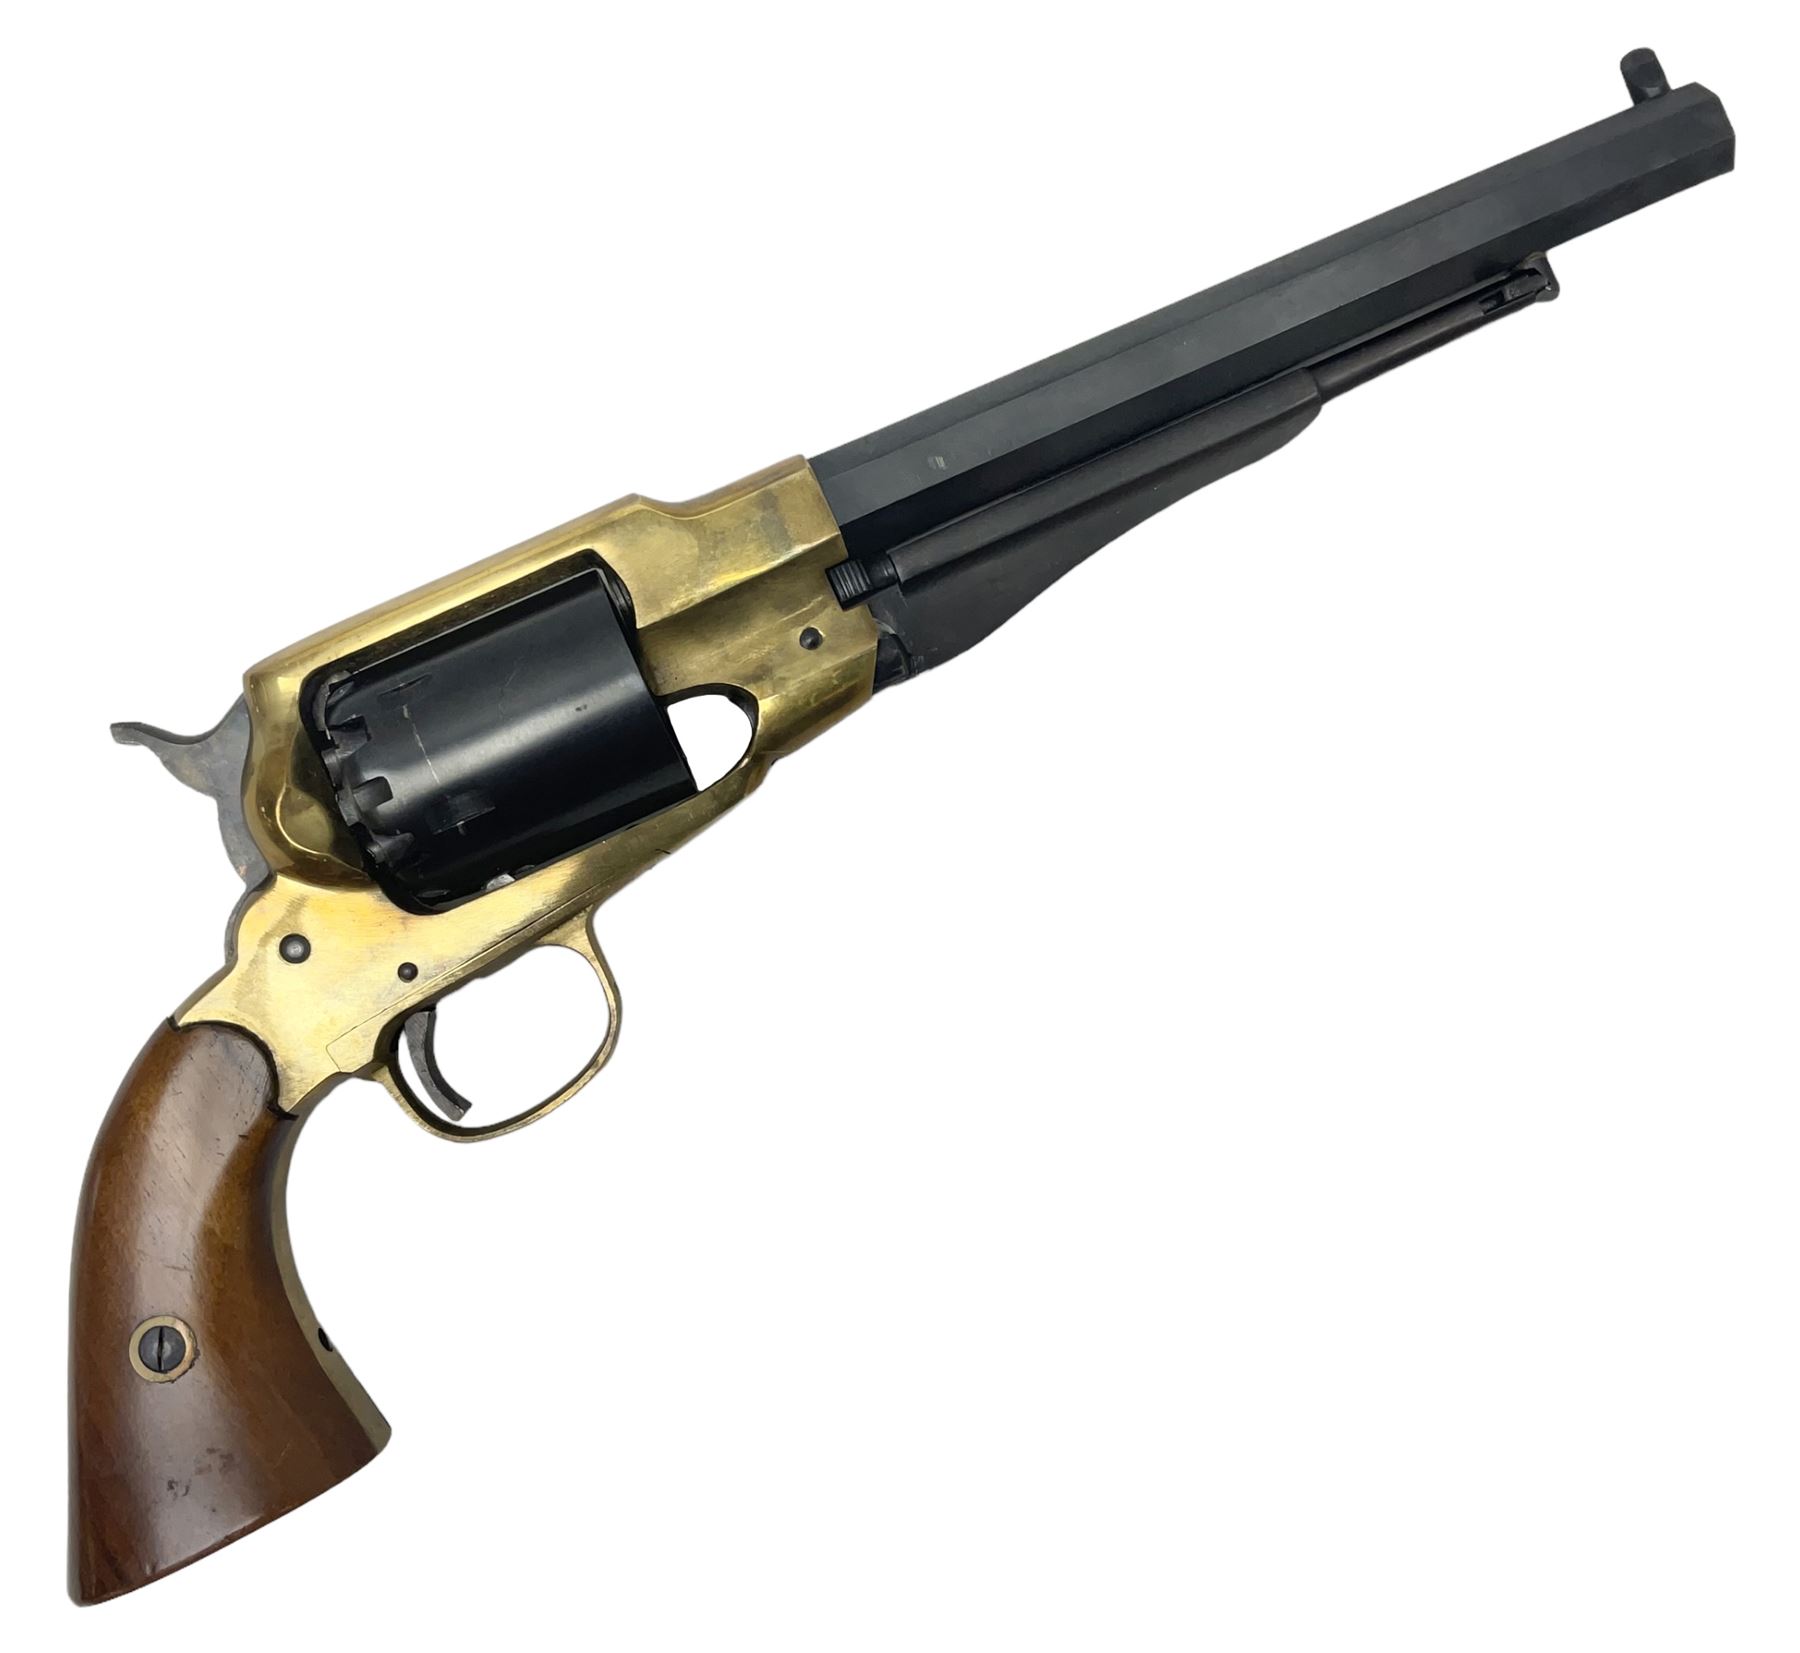 REGISTERED FIREARMS DEALER ONLY Modern Remington .44 calibre percussion brass framed army revolver